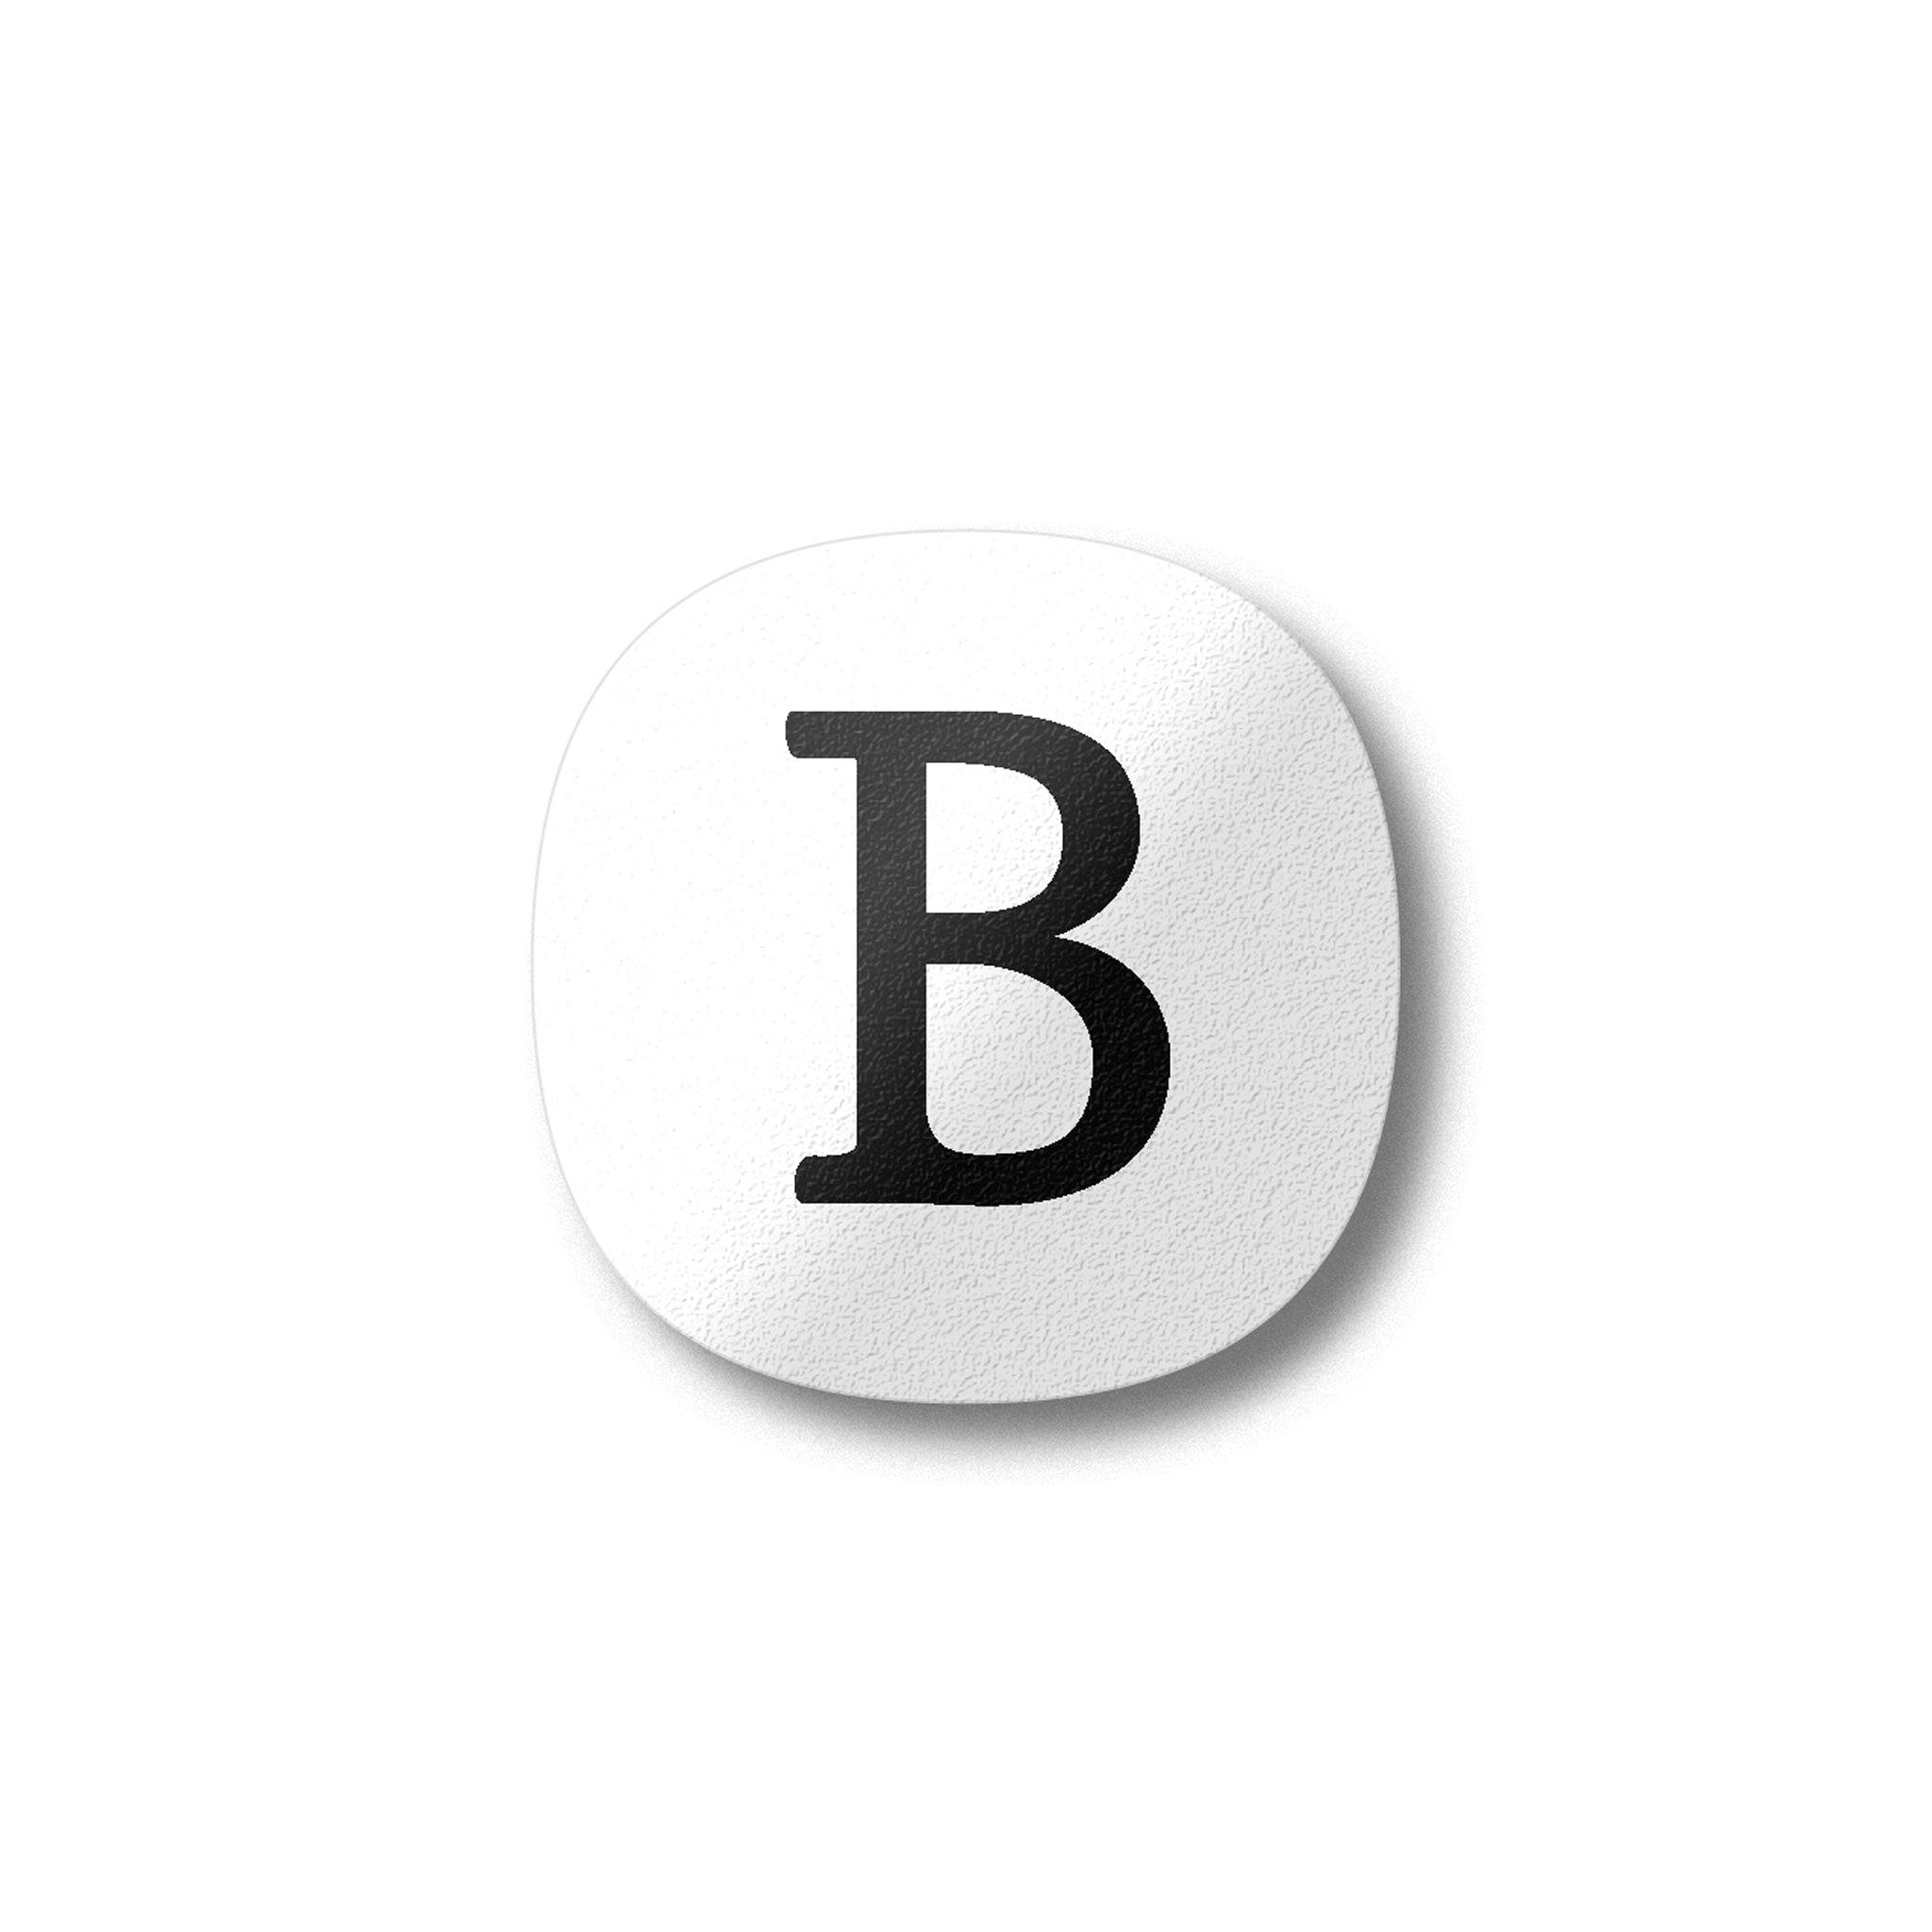 A white magnet with a black letter B plywood fridge magnet by Beyond the Fridge